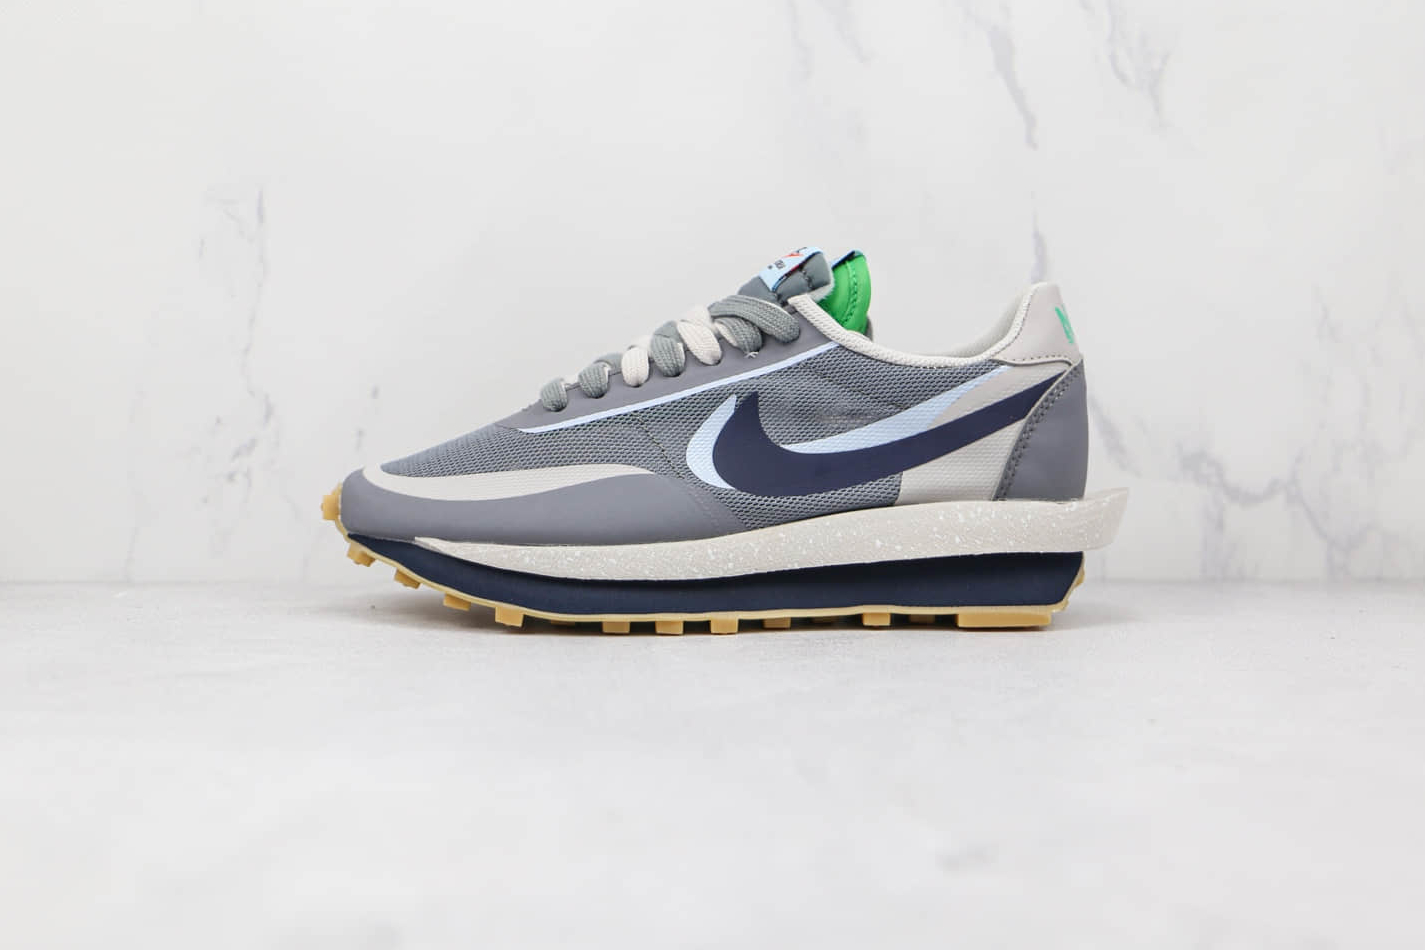 Nike sacai x Clot x LDWaffle 'Kiss Of Death 2' DH3114-001 - Limited Edition Sneakers